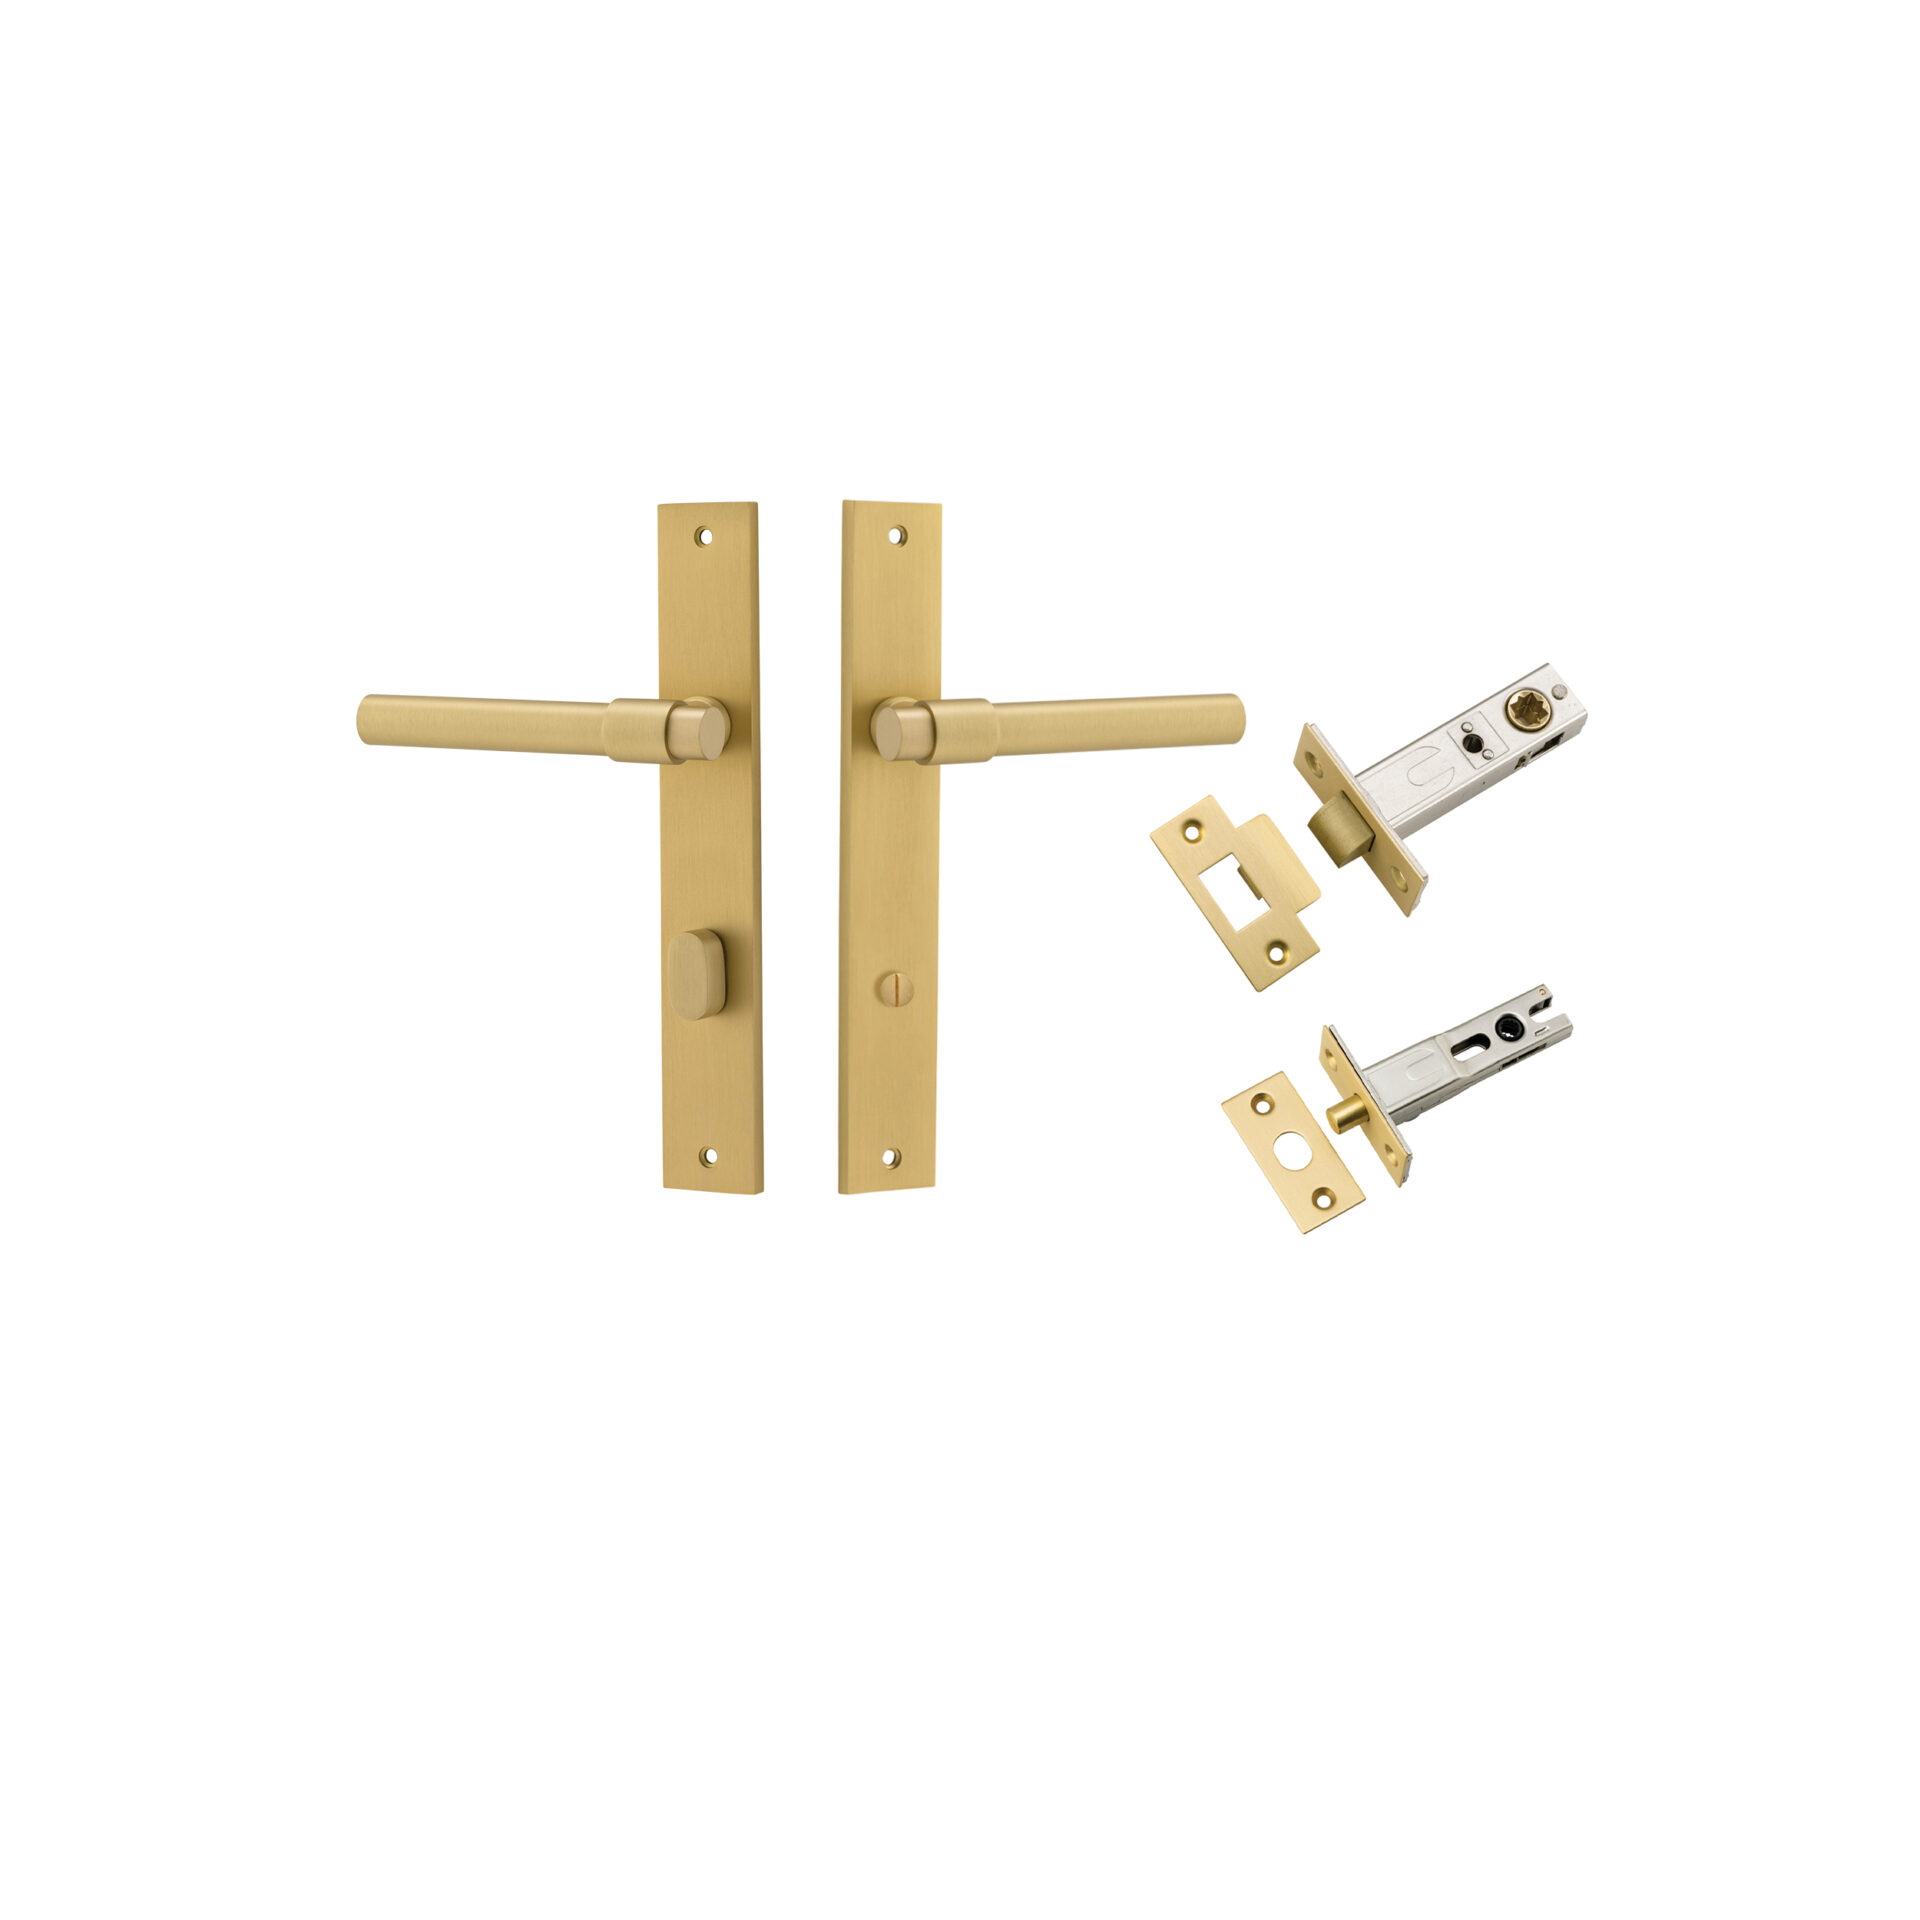 16396KPRIV60 - Helsinki Lever - Rectangular Backplate Privacy Kit with Privacy Turn - Brushed Gold PVD - Privacy